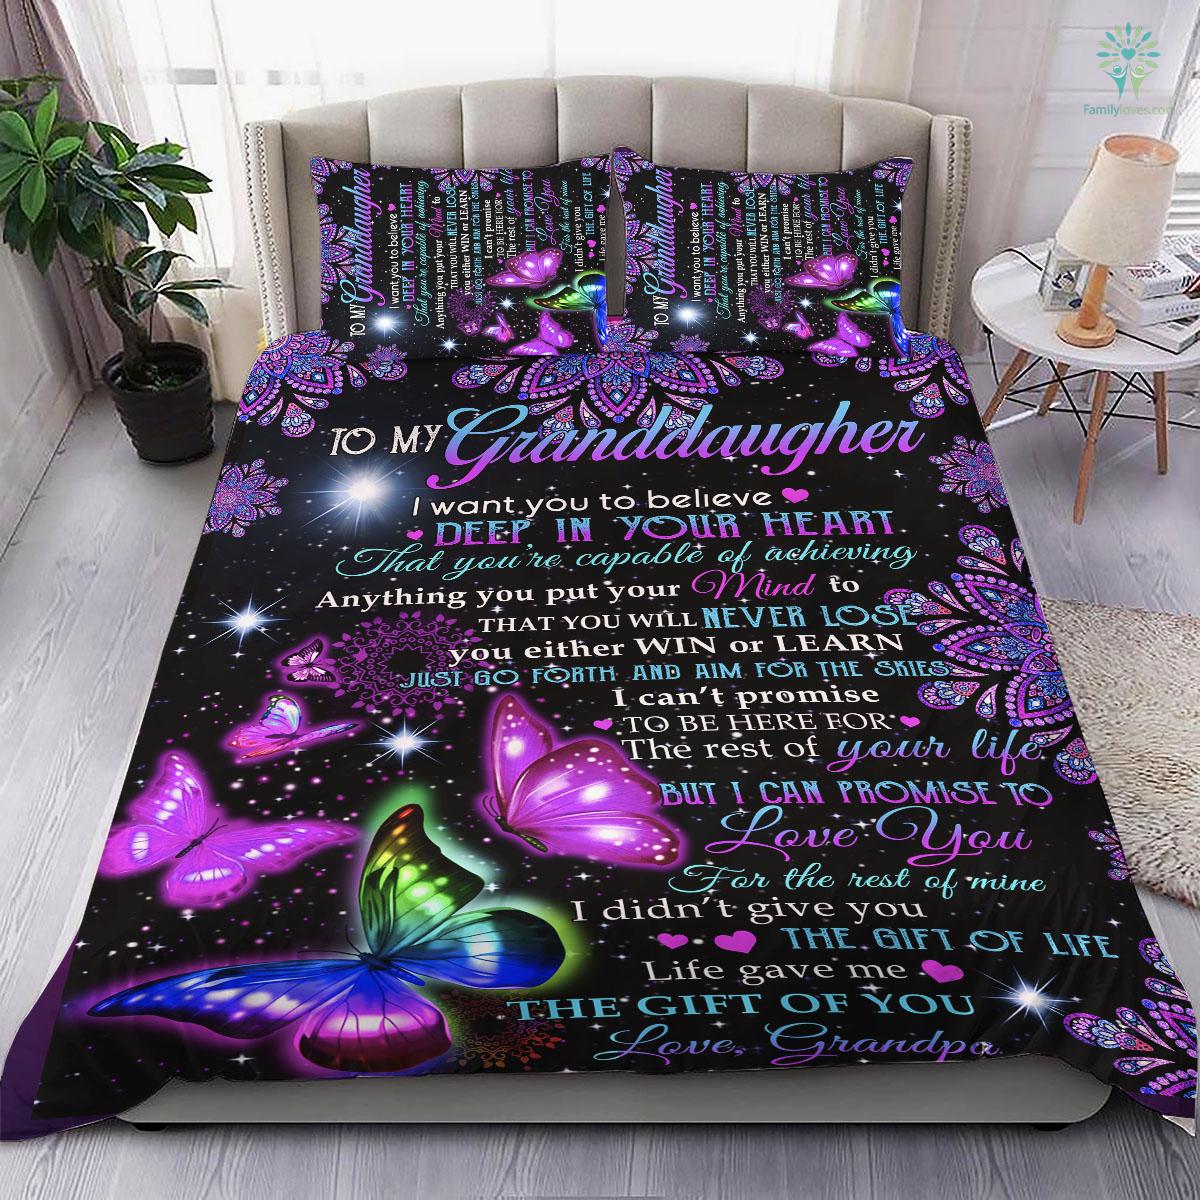 Butterfly Purple Grandpa I Want You To Believe Deep In Your Heart To My Granddaughter Bedding Set - Family Loves US Military Veterans Shirts Gifts Ideas